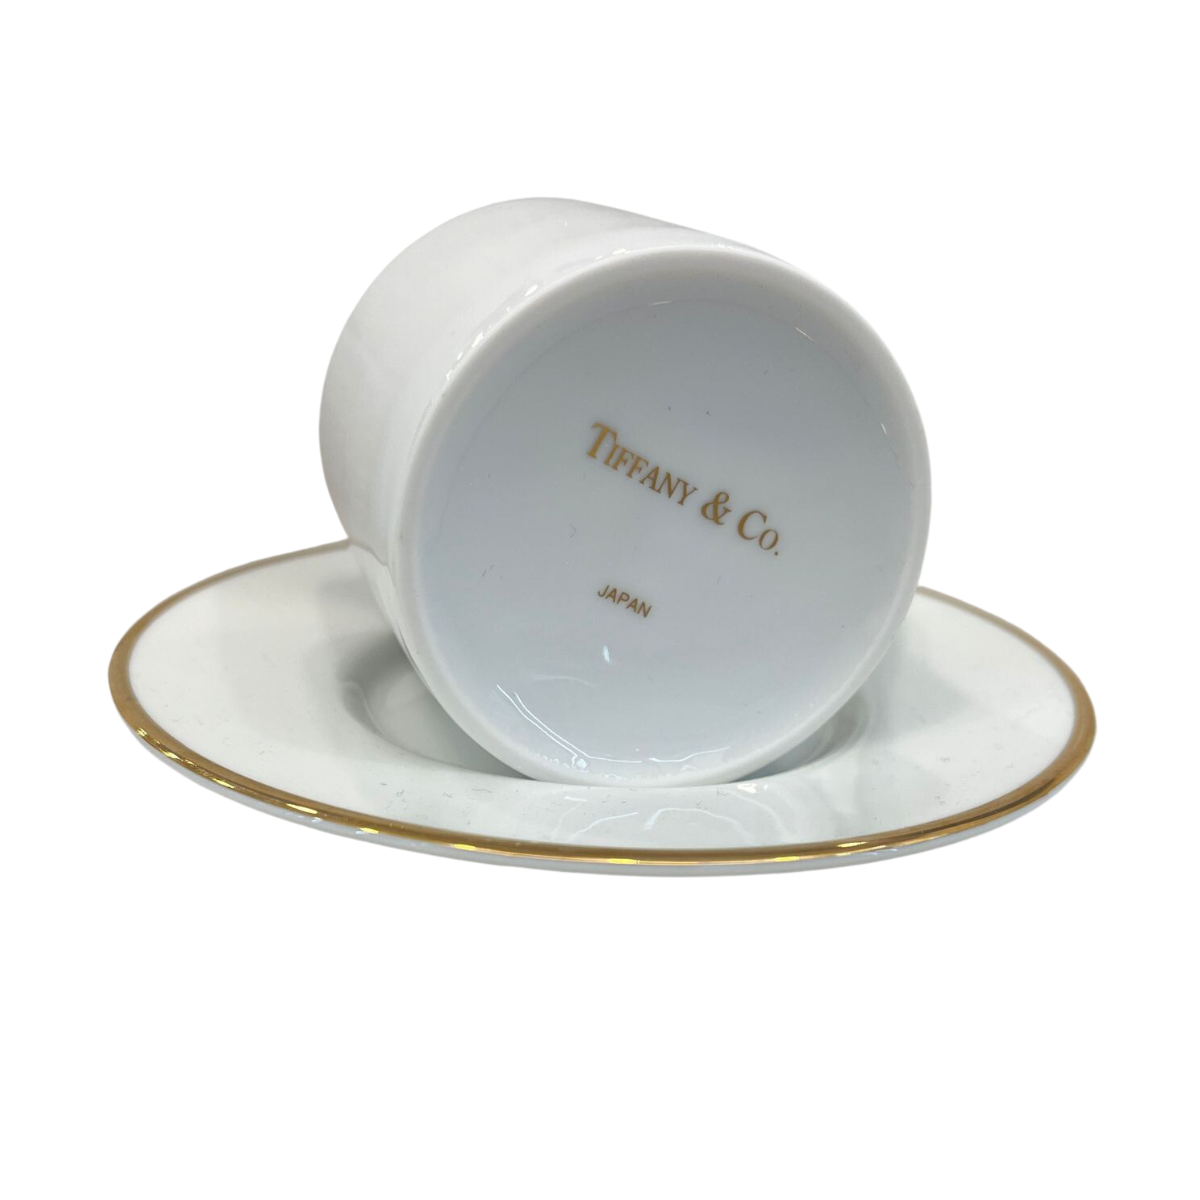 Tiffany & Co Cup D=6Cm Saucer D=12.5Cm Demitasse Coffee Cup&Saucer Wht W Silver Set Of 2